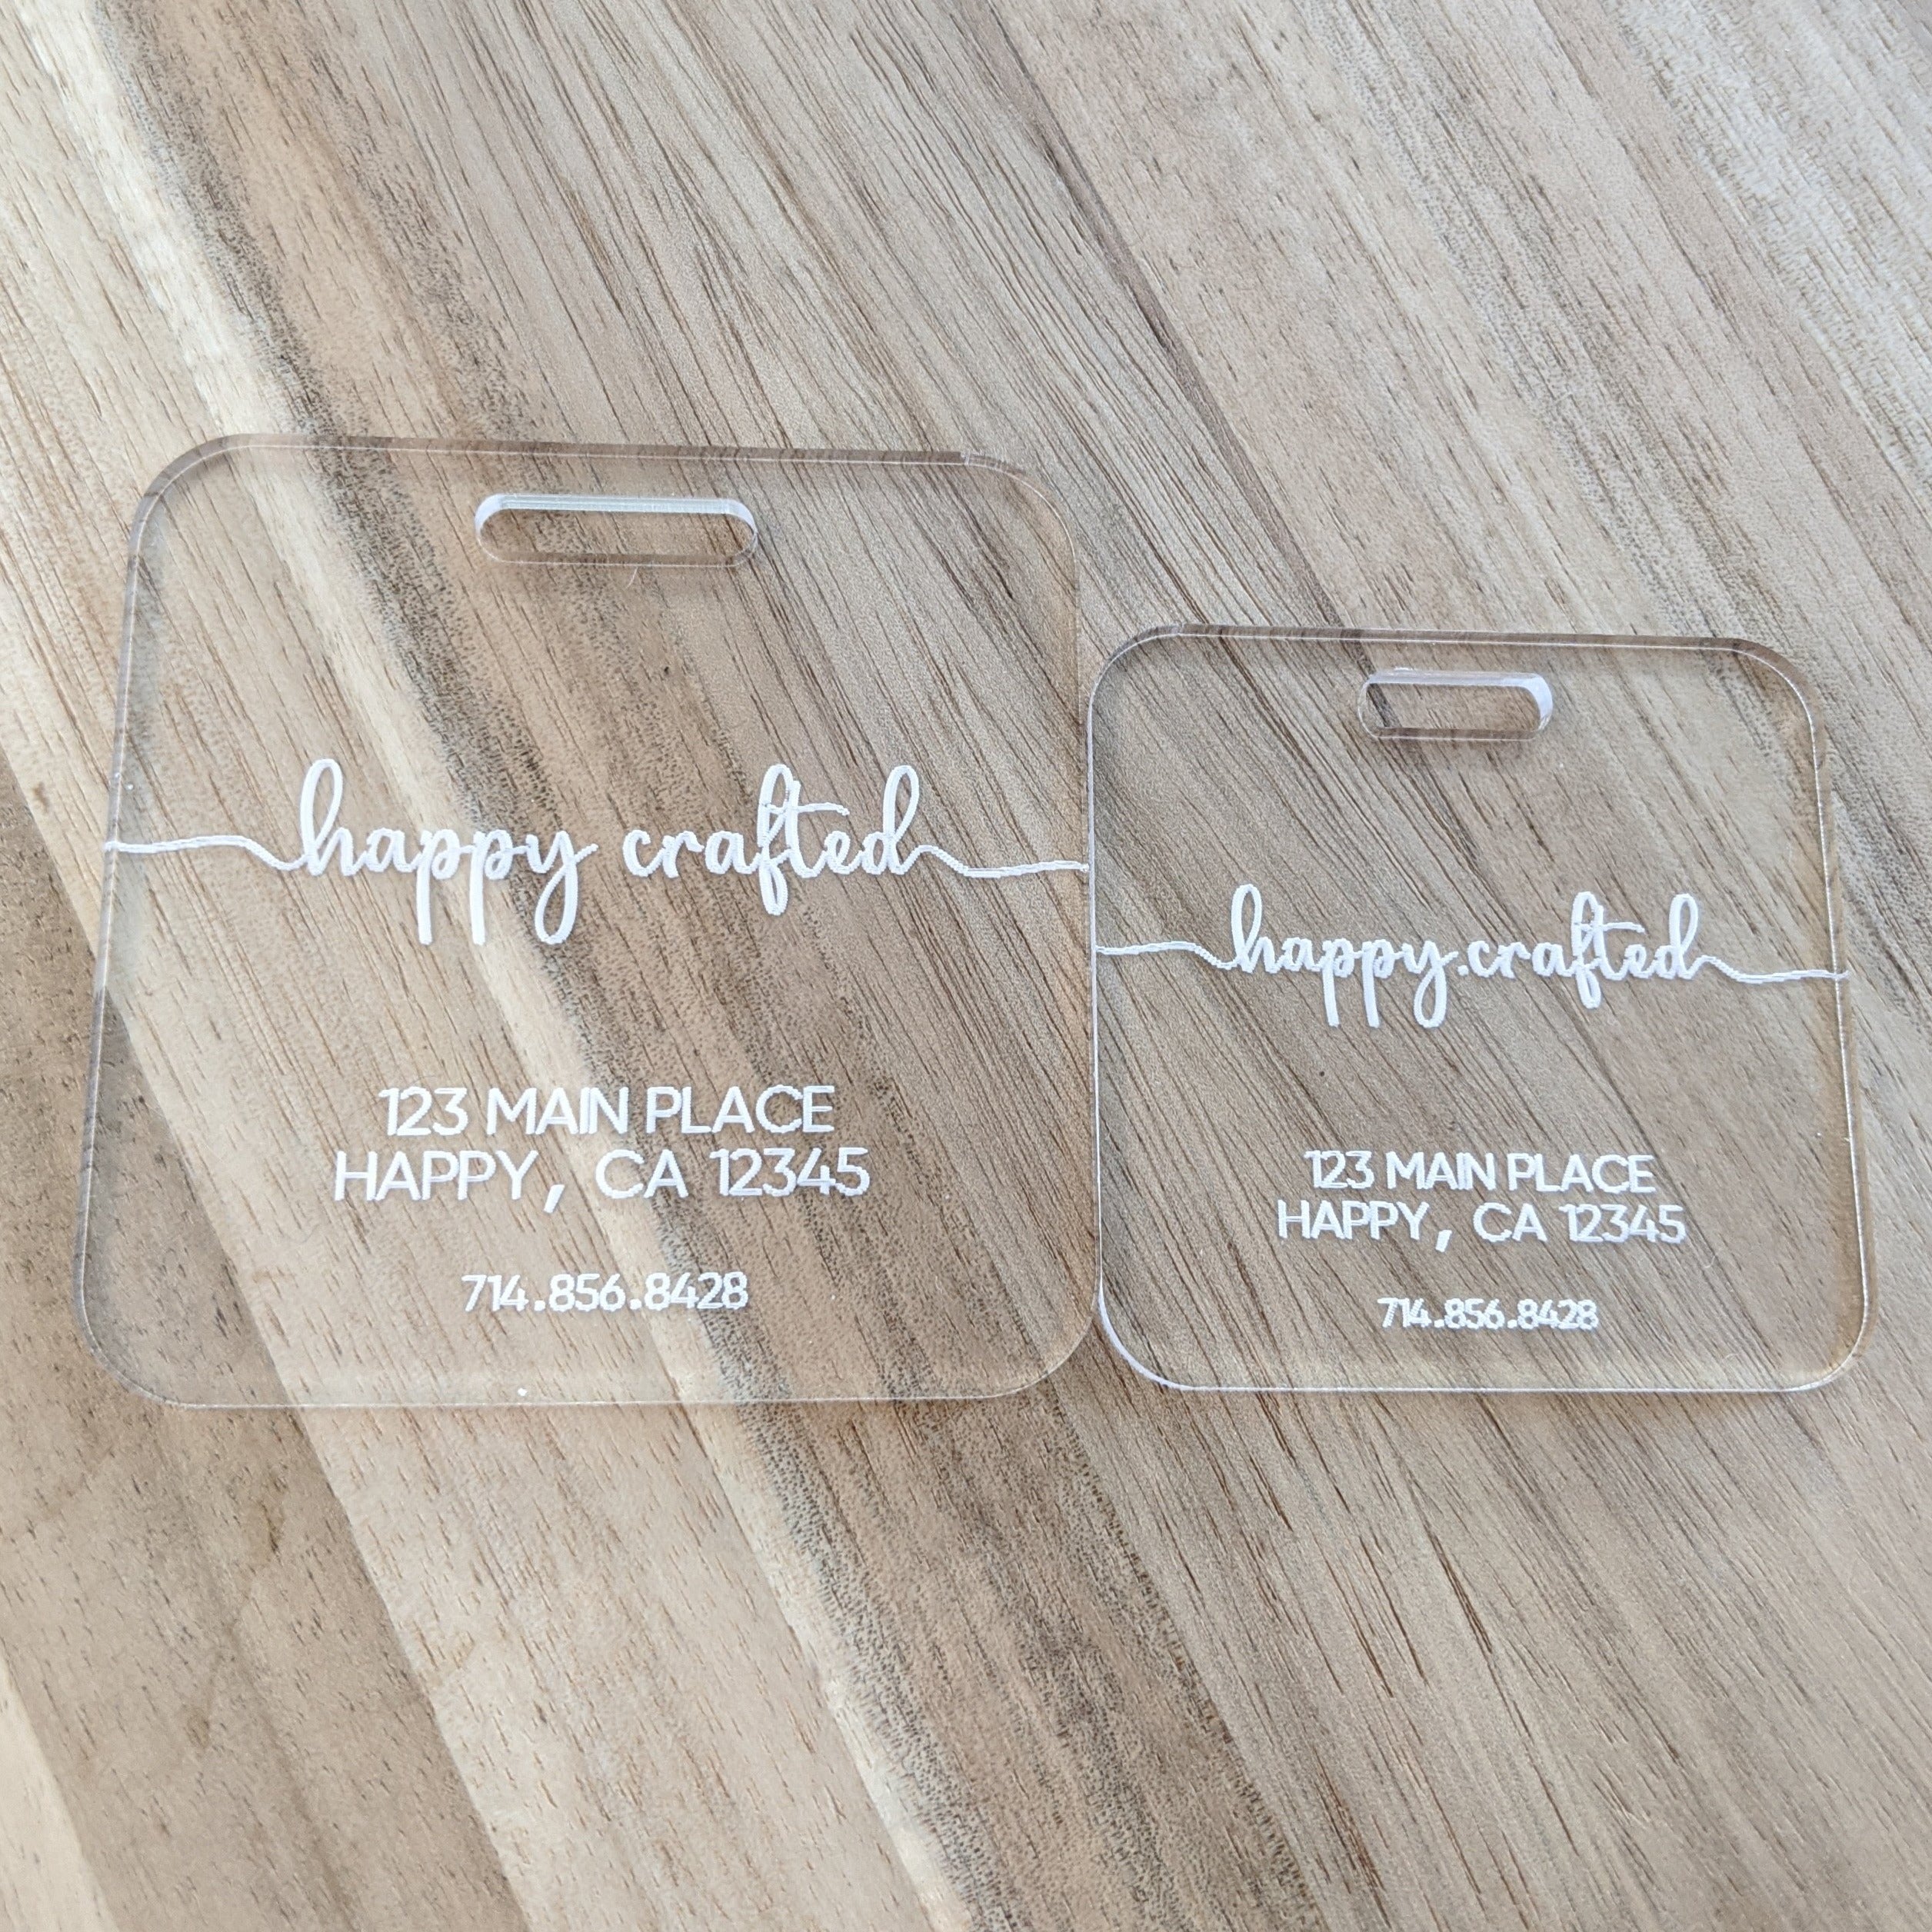 Branches - Personalized Acrylic Luggage Tag